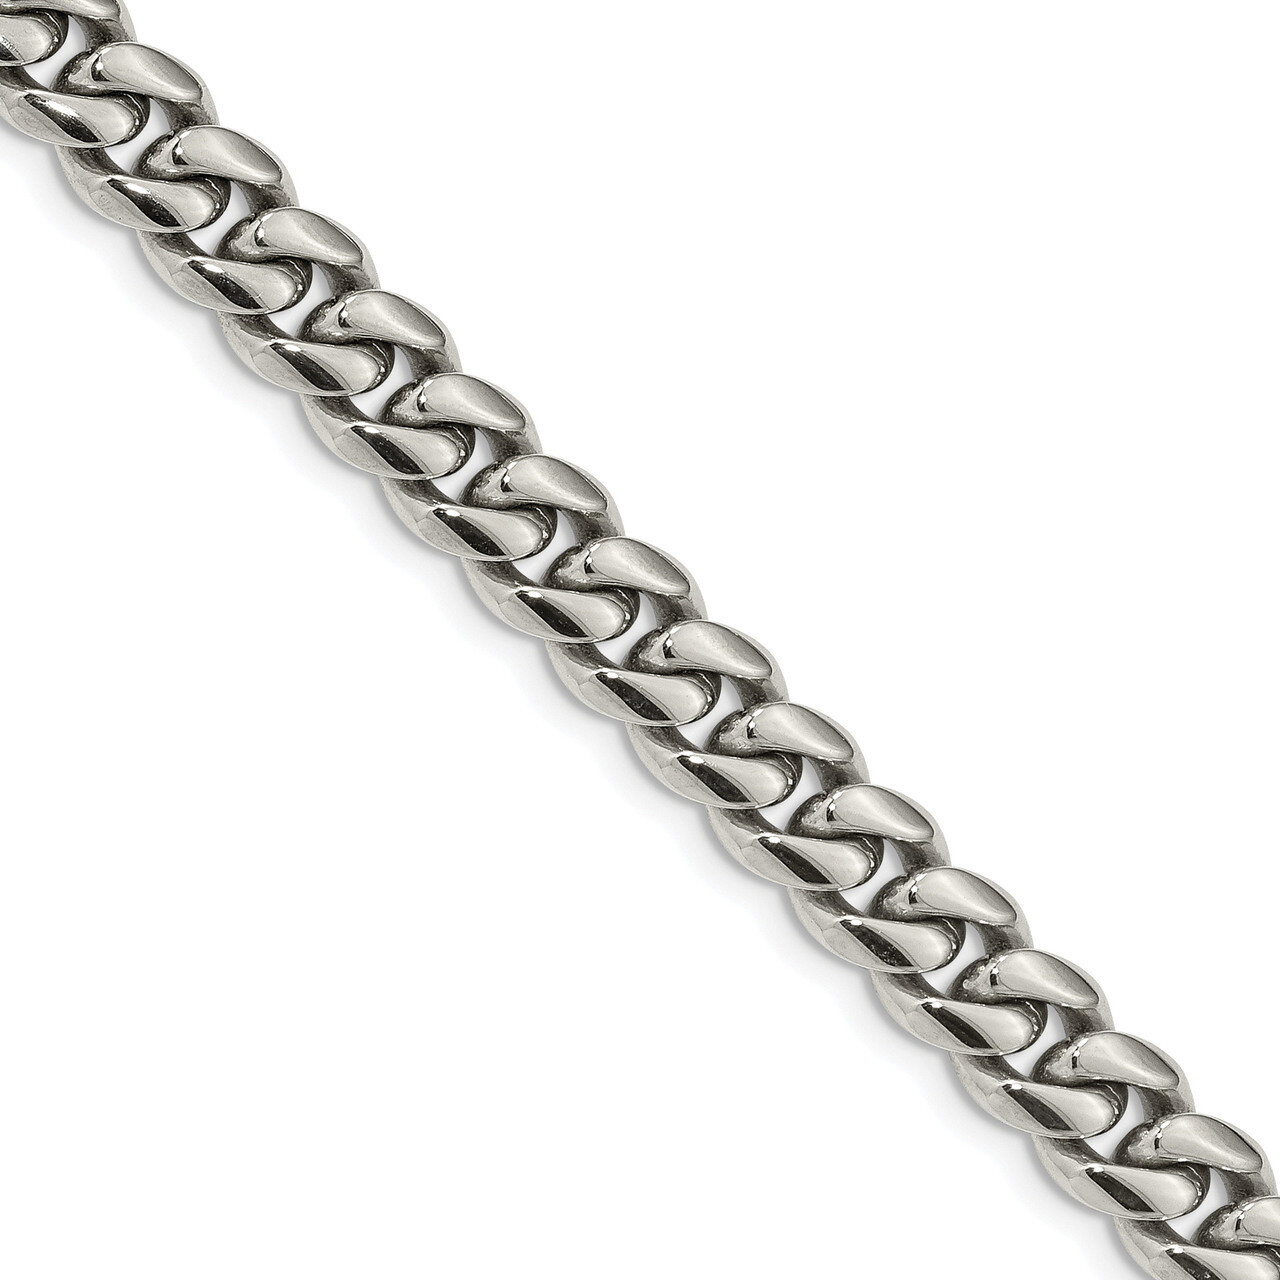 8.5 Inch Curb Chain Bracelet Stainless Steel Polished SRB2524-8.5